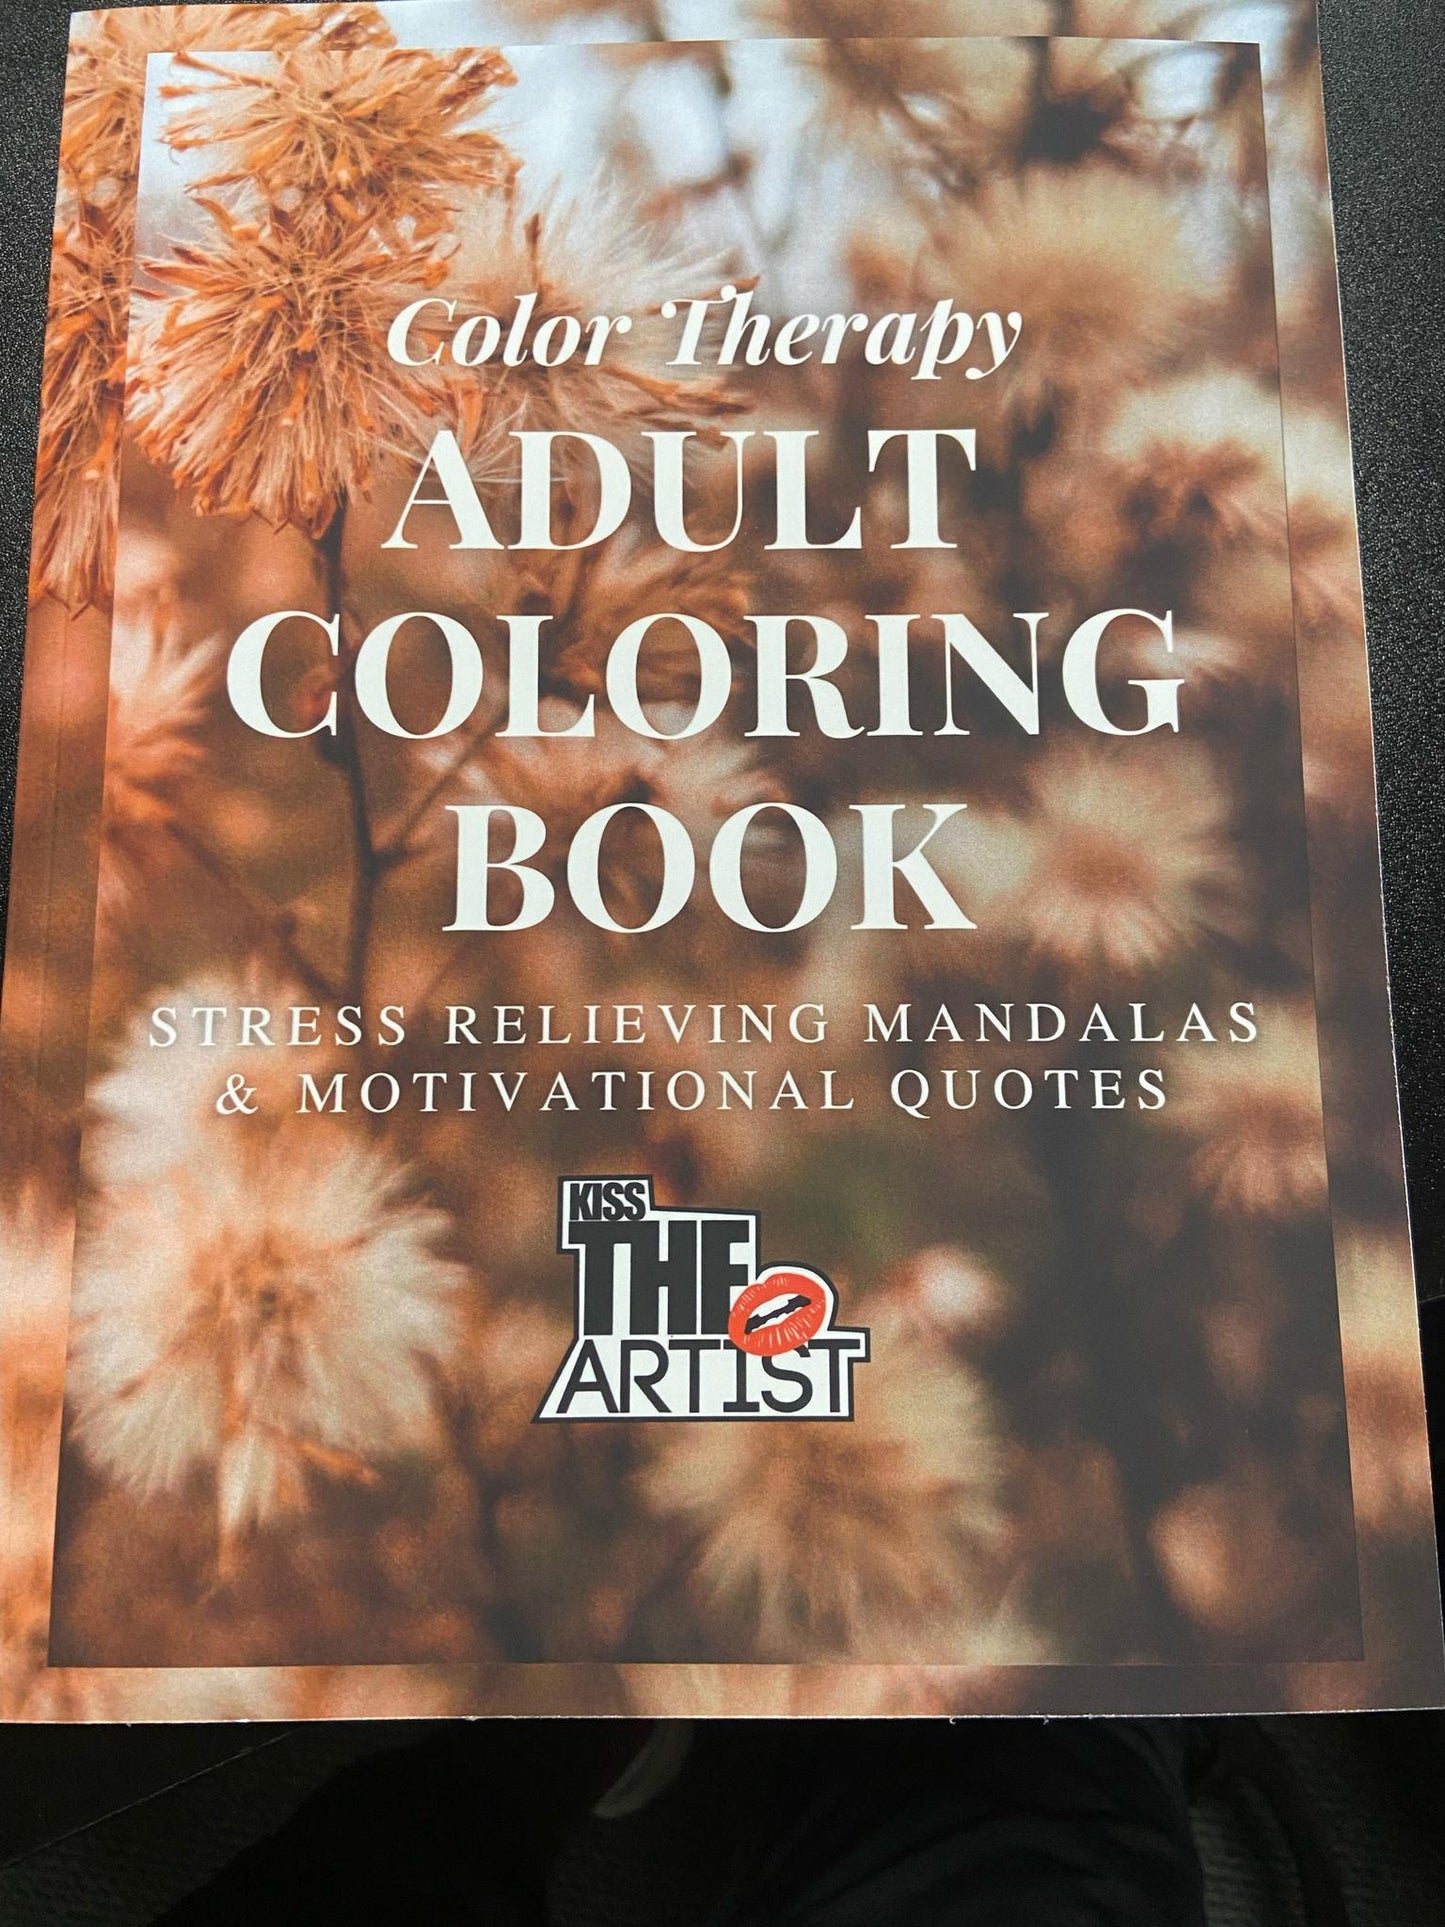 "Color Therapy Adult Coloring Book Stress Relieving Mandalas & Motivational Quotes" by Alexis Vinique